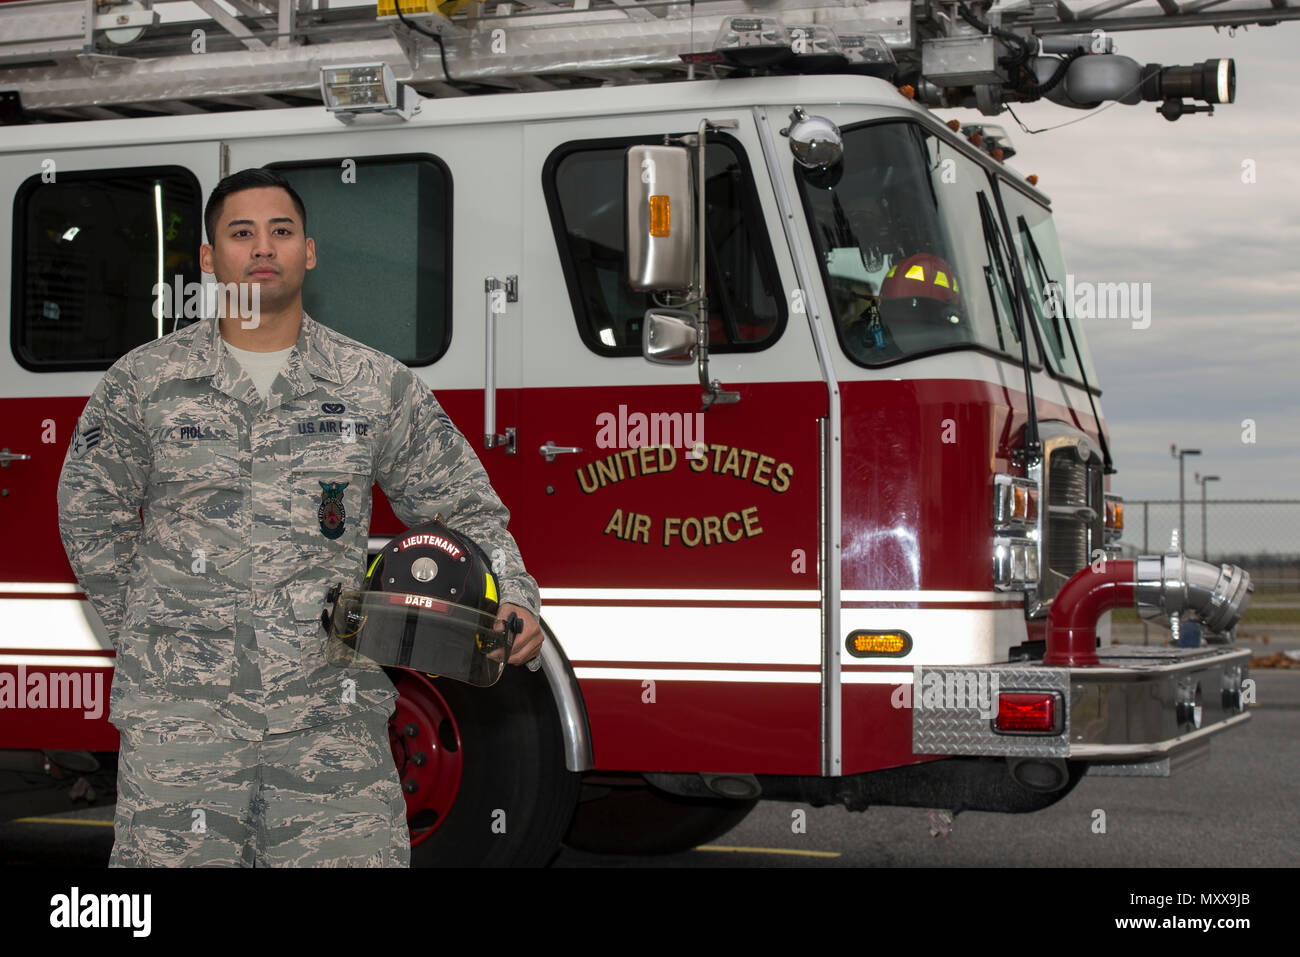 Senior Airman Jason Piol, 436th Civil Engineer Squadron fire protection journeyman stands in front of a fire truck Dec. 8, 2016, by the fire department on Dover Air Force Base, Del. The fire department remains staffed 24/7, 365 days a year to ensure fire prevention for the installation at all times. (U.S. Air Force photo by Senior Airman Aaron J. Jenne) Stock Photo